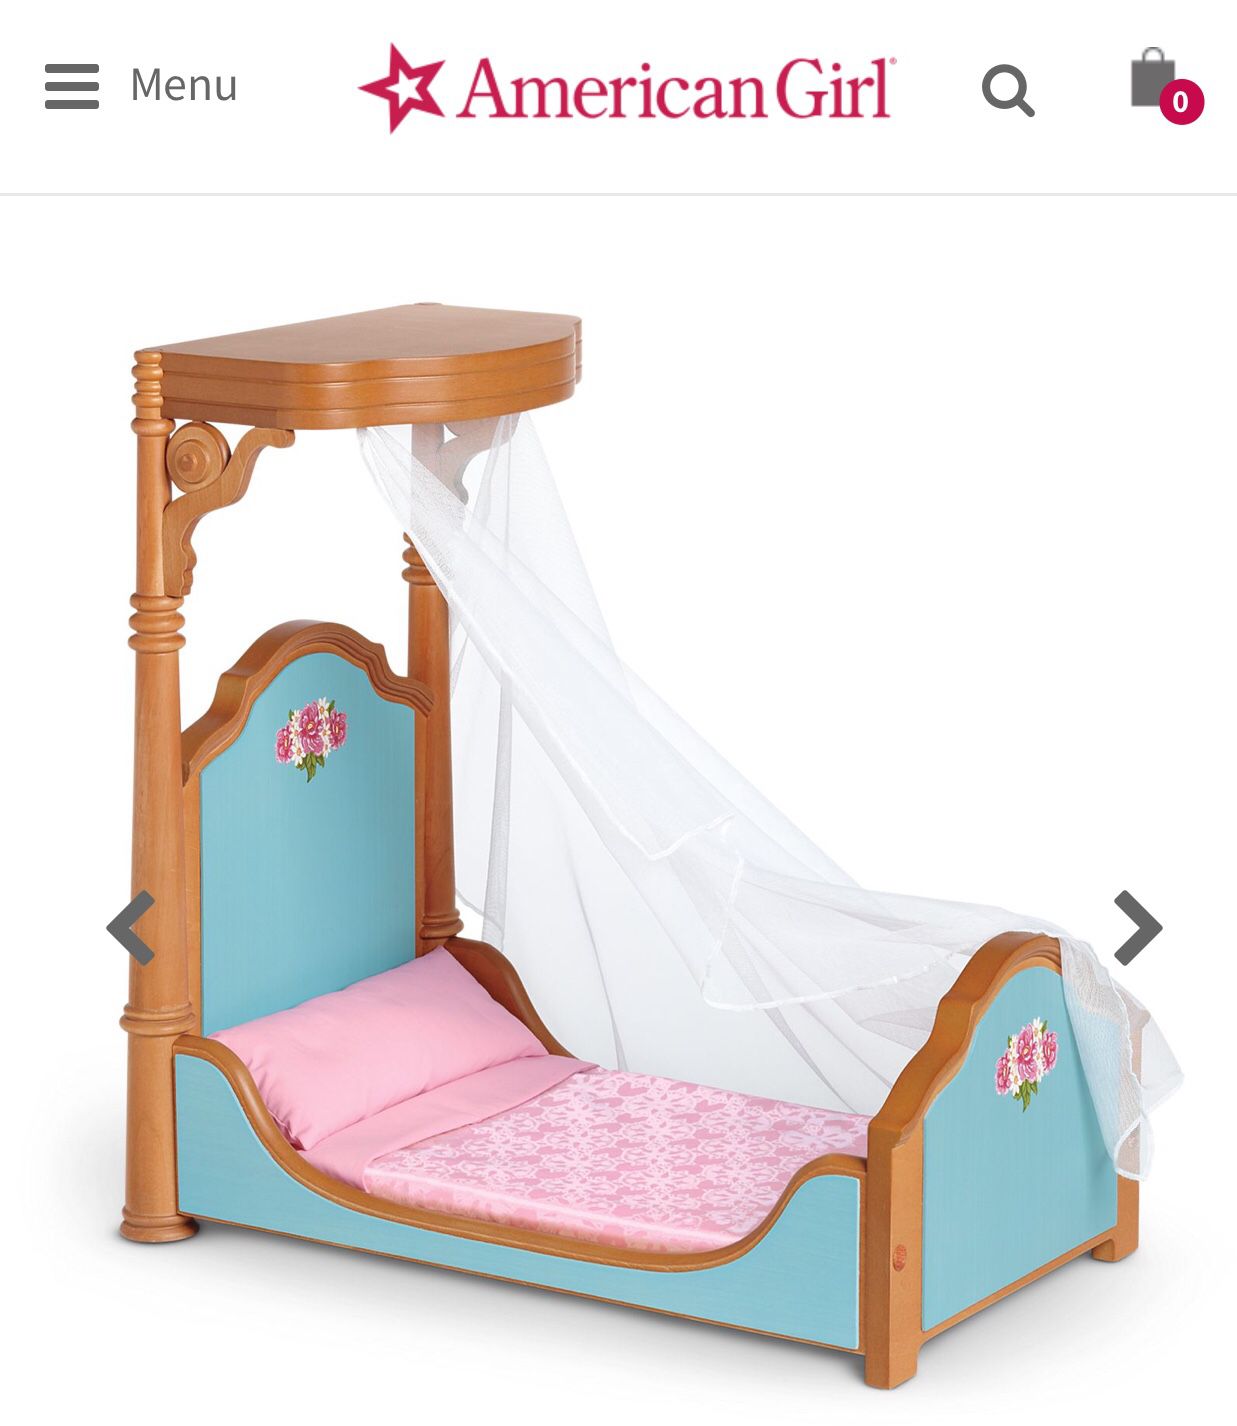 American Girl Doll wood bed with netting & bedding